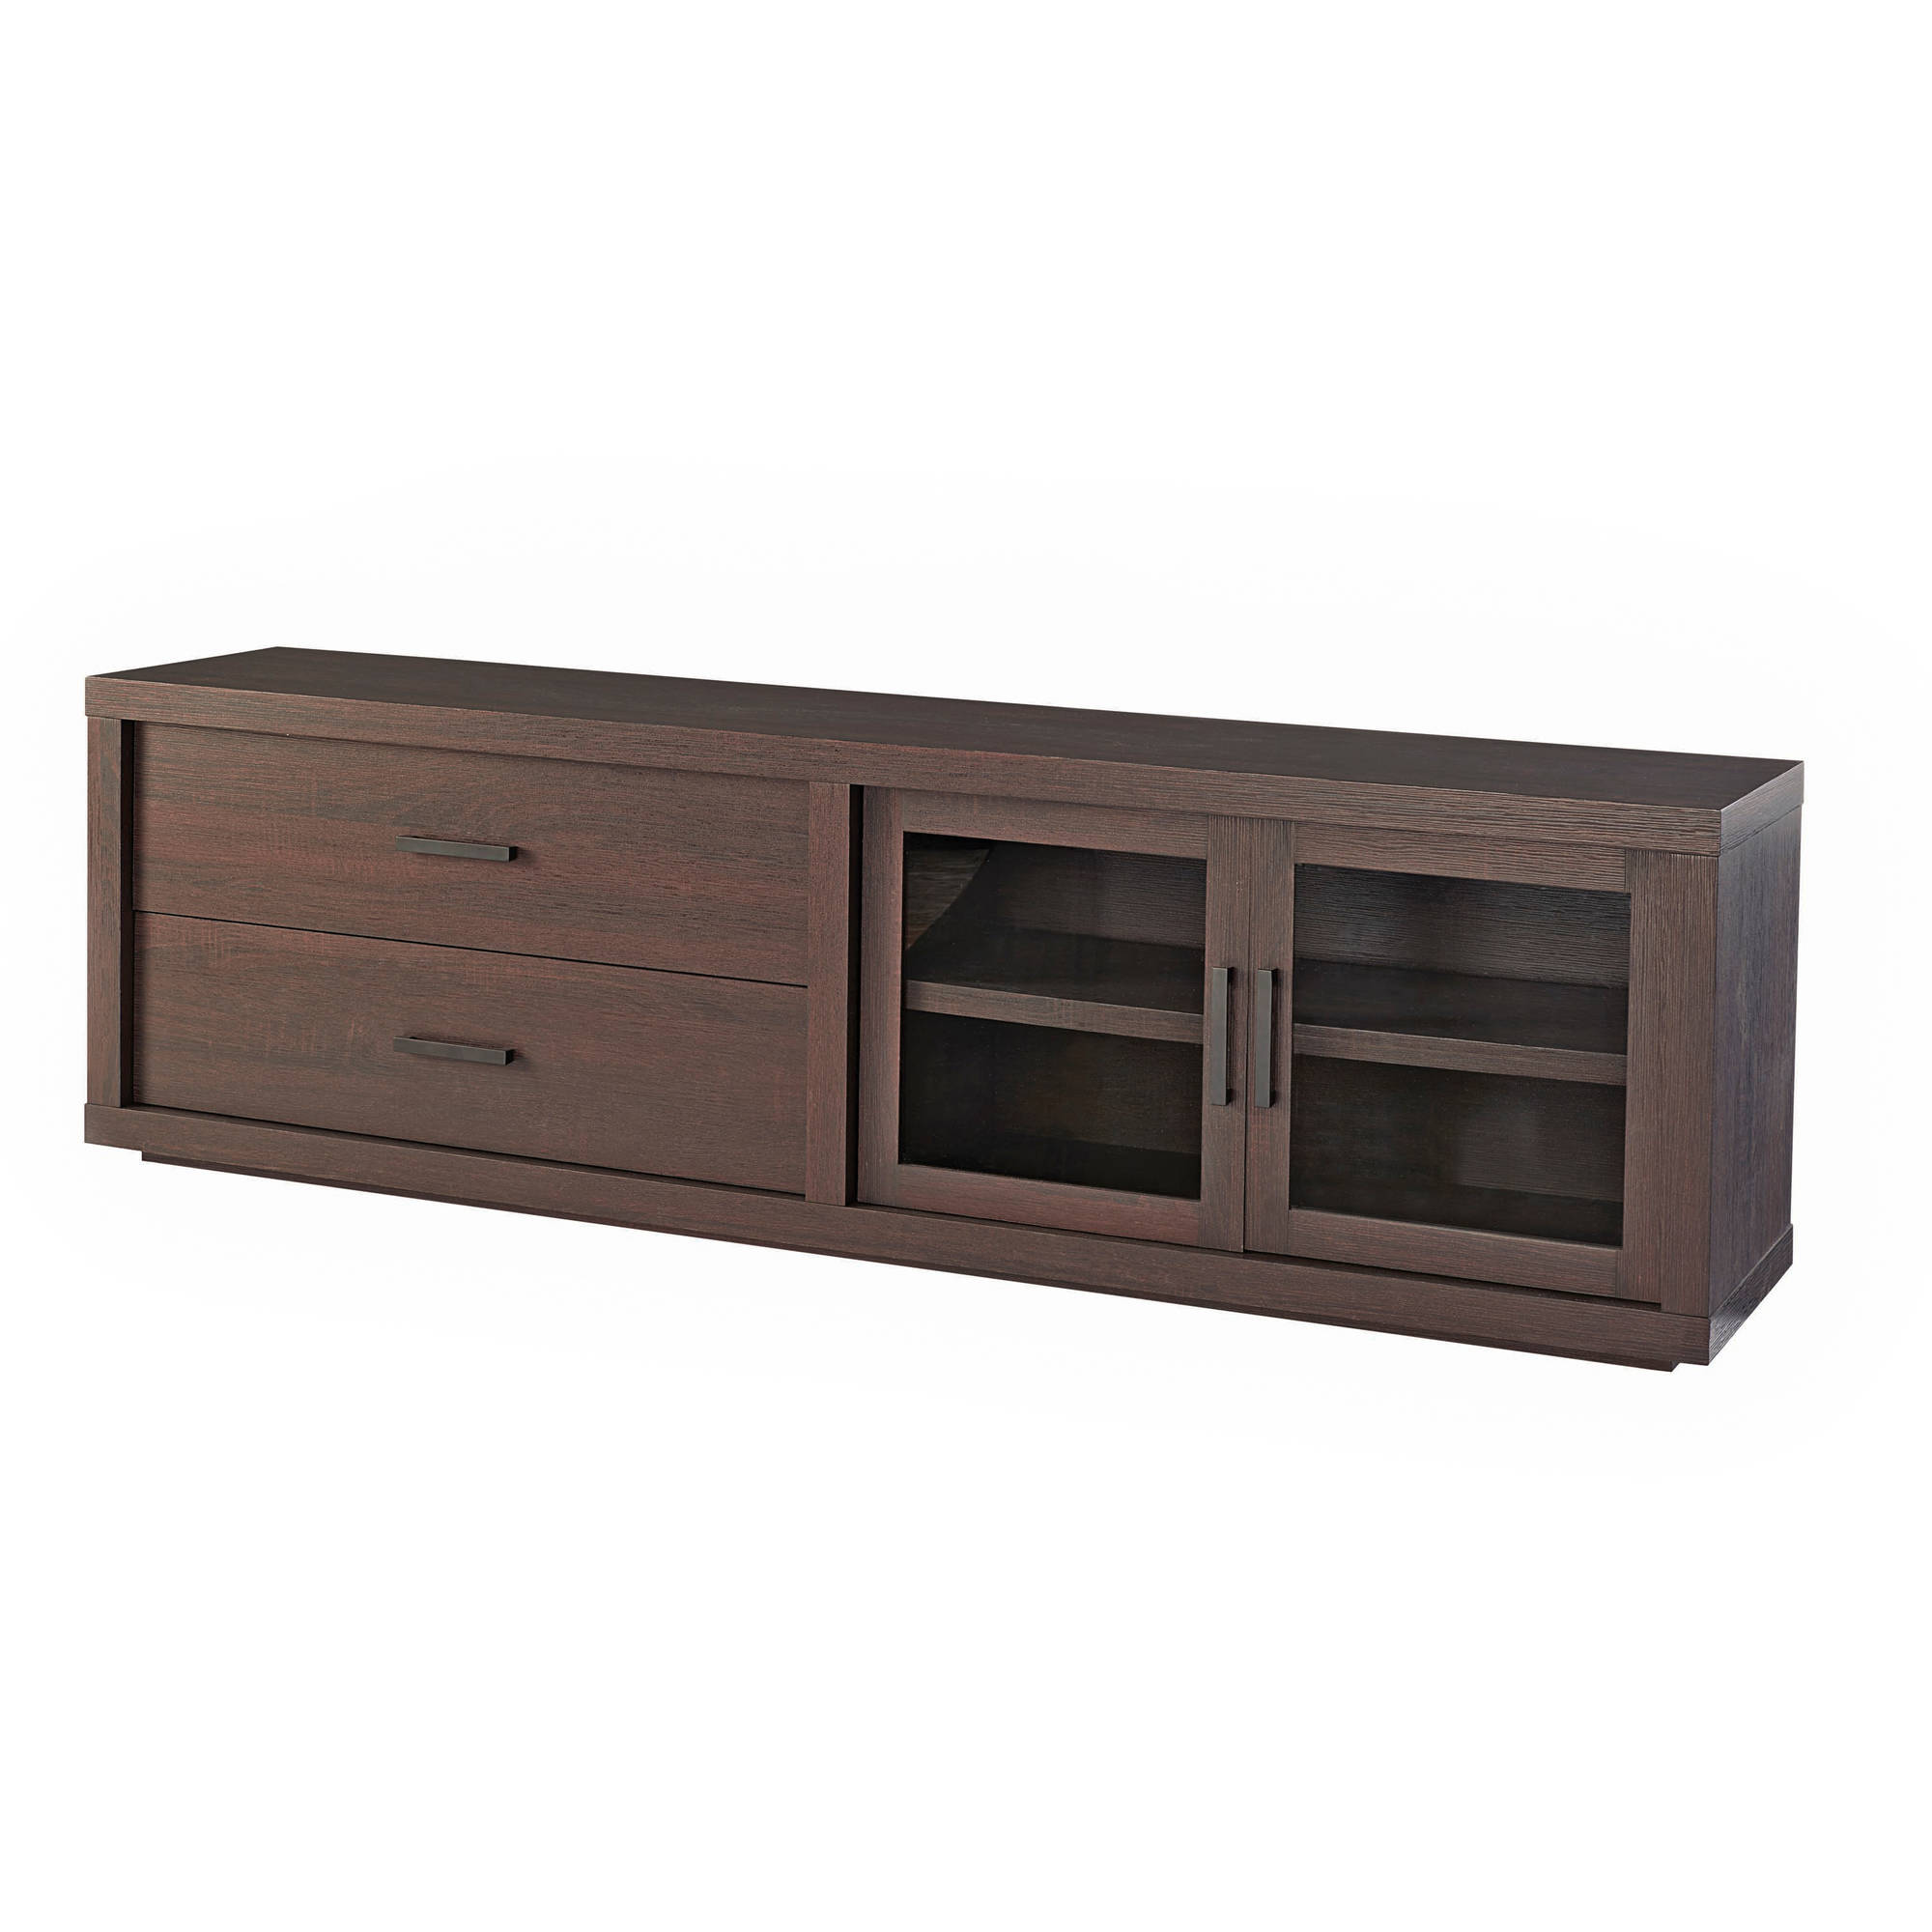 Better Homes & Gardens Steele TV Stand for TV's up to 80", Espresso - image 3 of 11